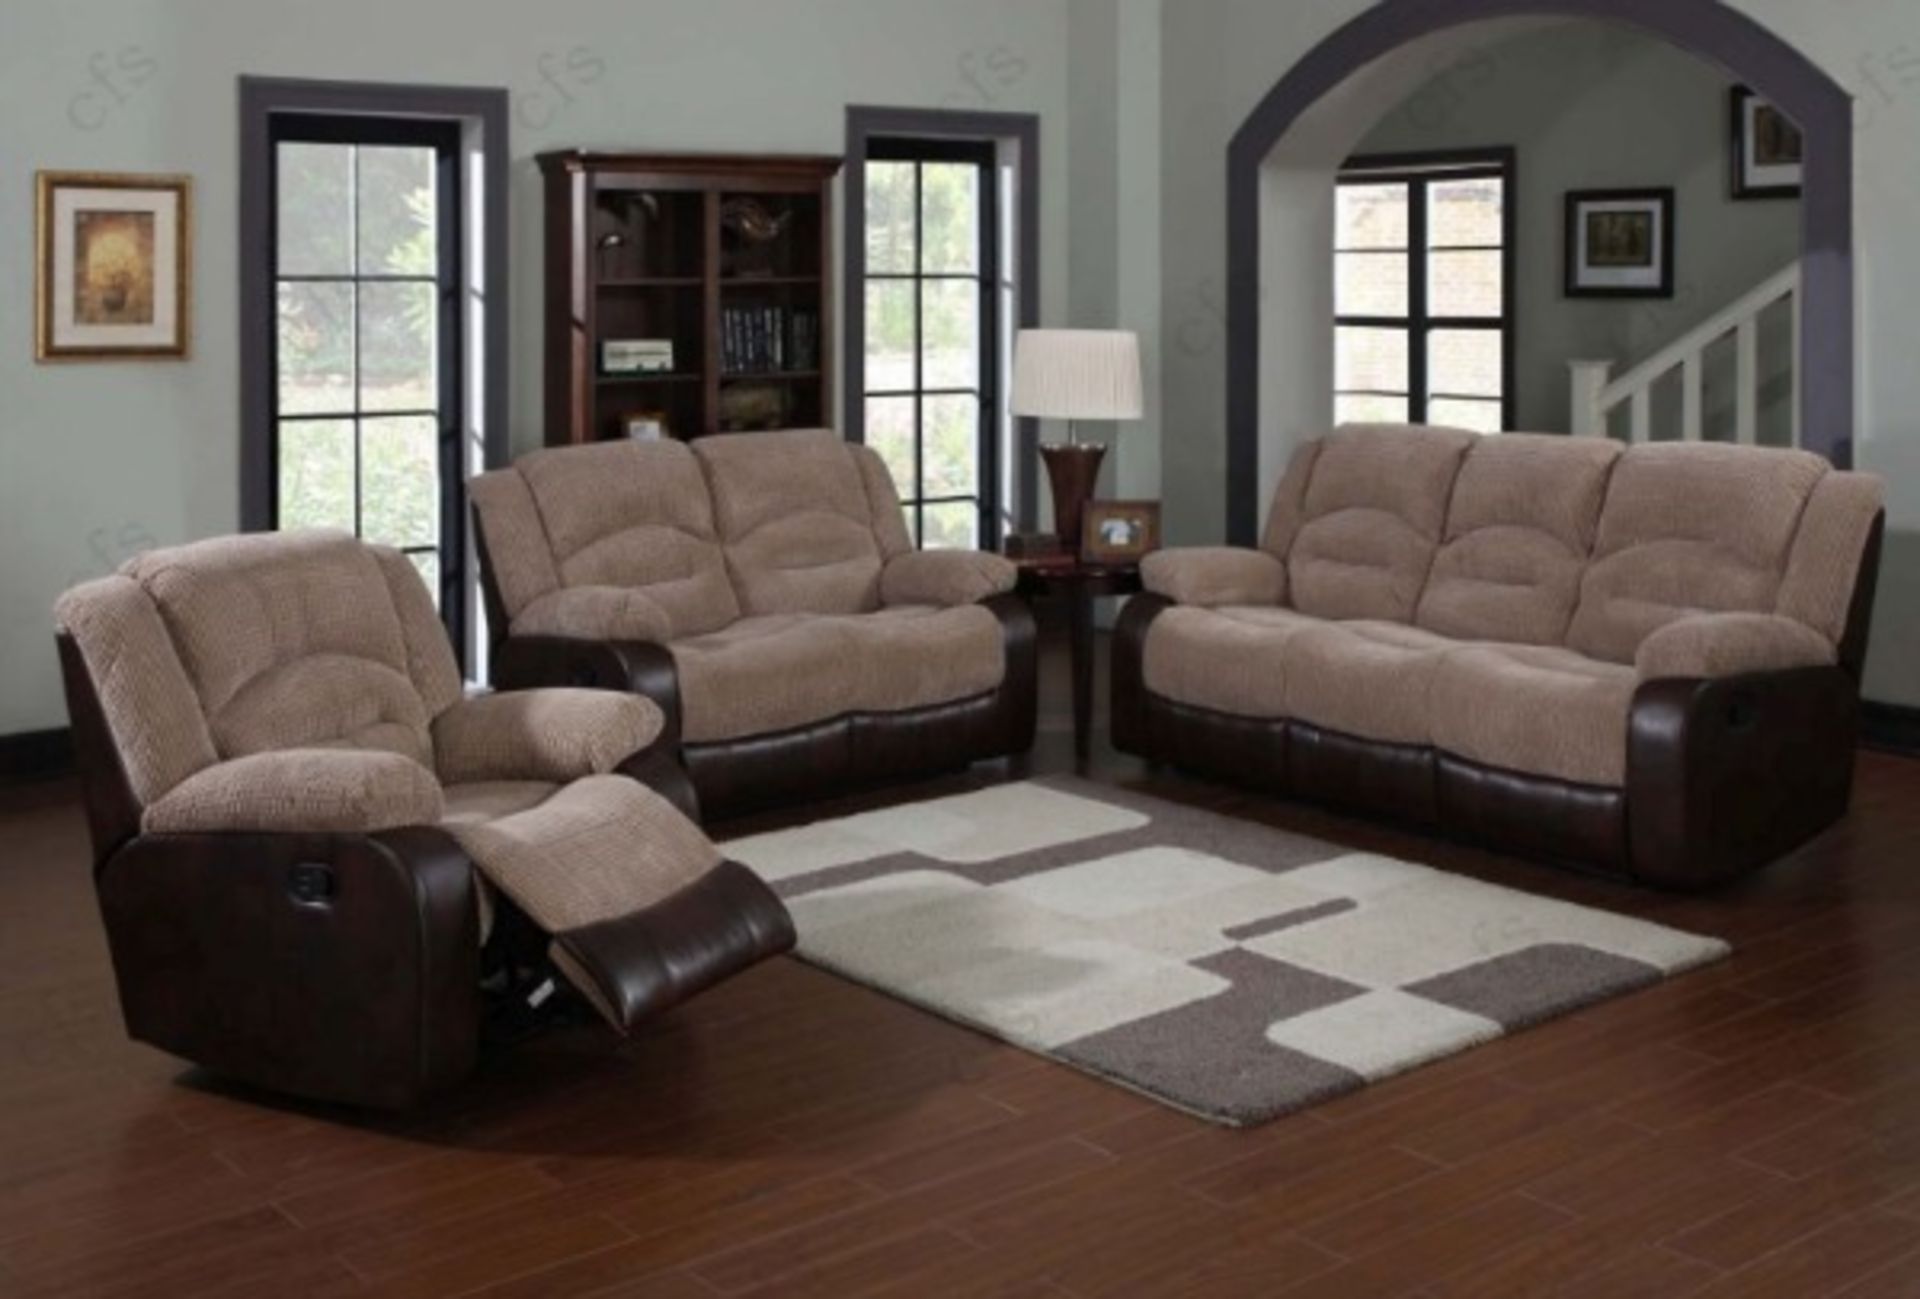 Brand new direct from the manufacturers Morrocco 3 seater reclining sofa plus 2 seater arm chair